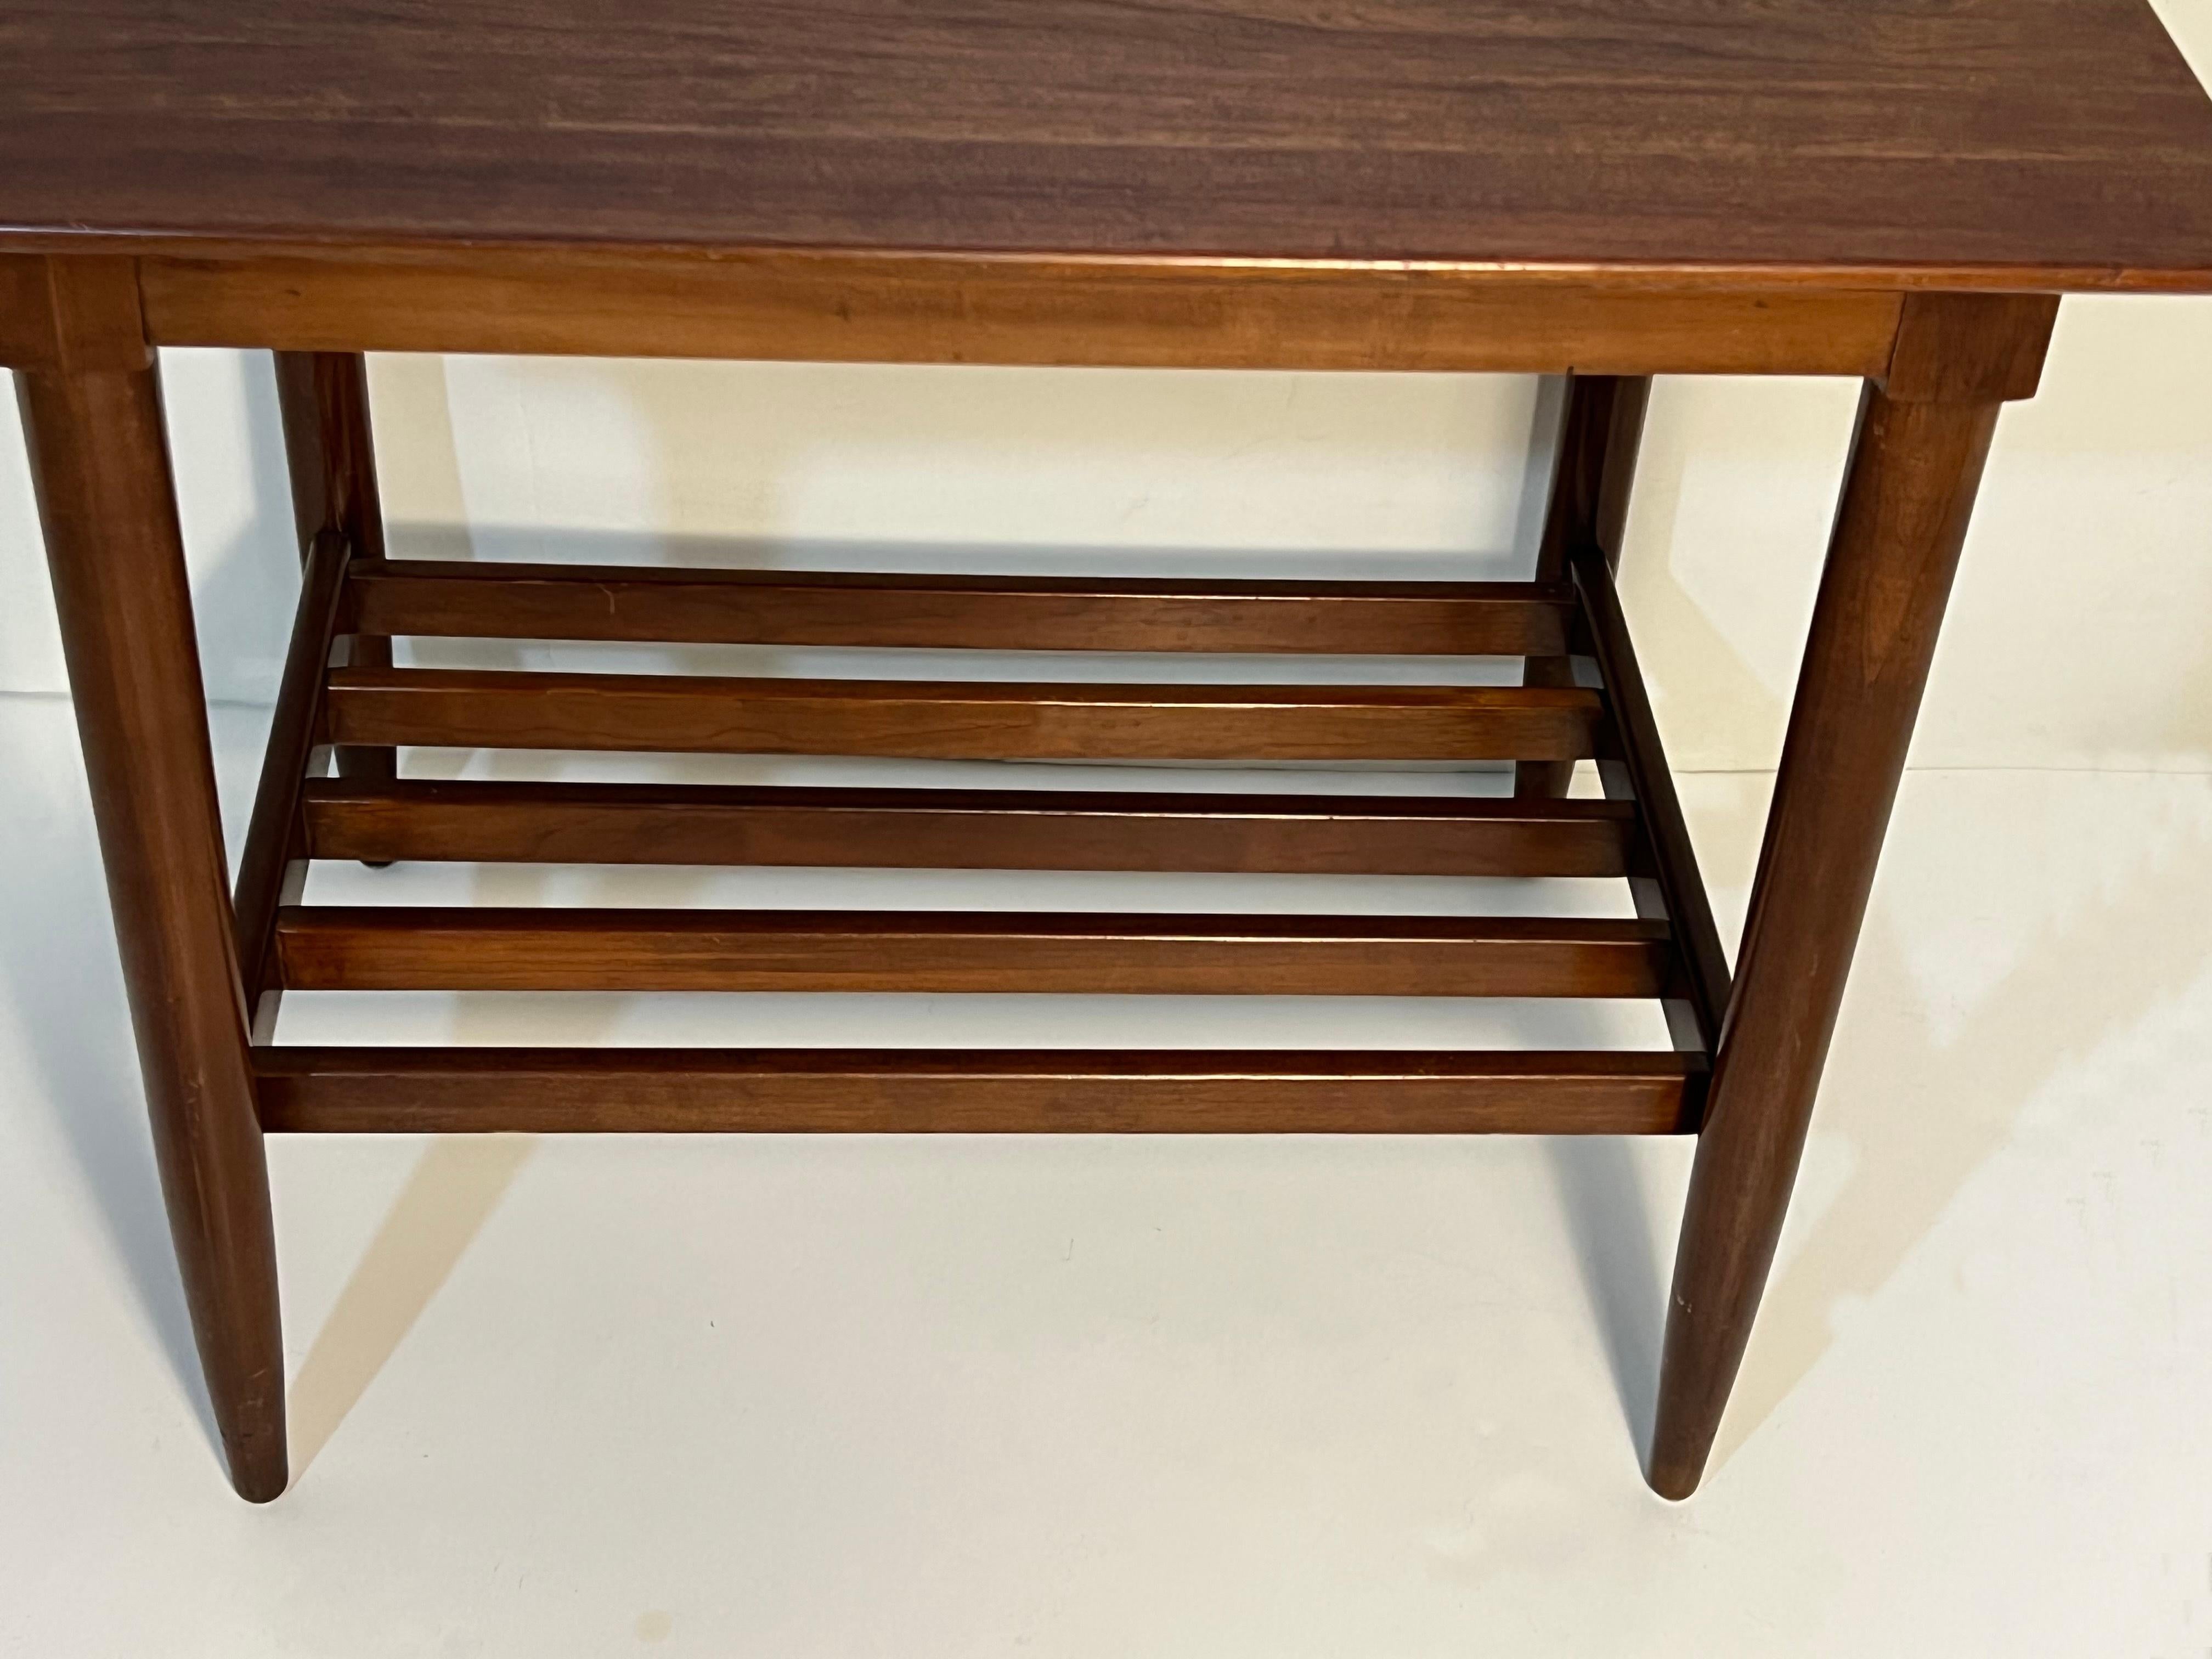 These side tables are made of solid cherry. The slatted bottom tier is very convenient for storing books or magazines as it prevents them to get moldy.
The Willett Furniture company was founded in 1934 by W.R. Willett and C.H. Willett. 
The